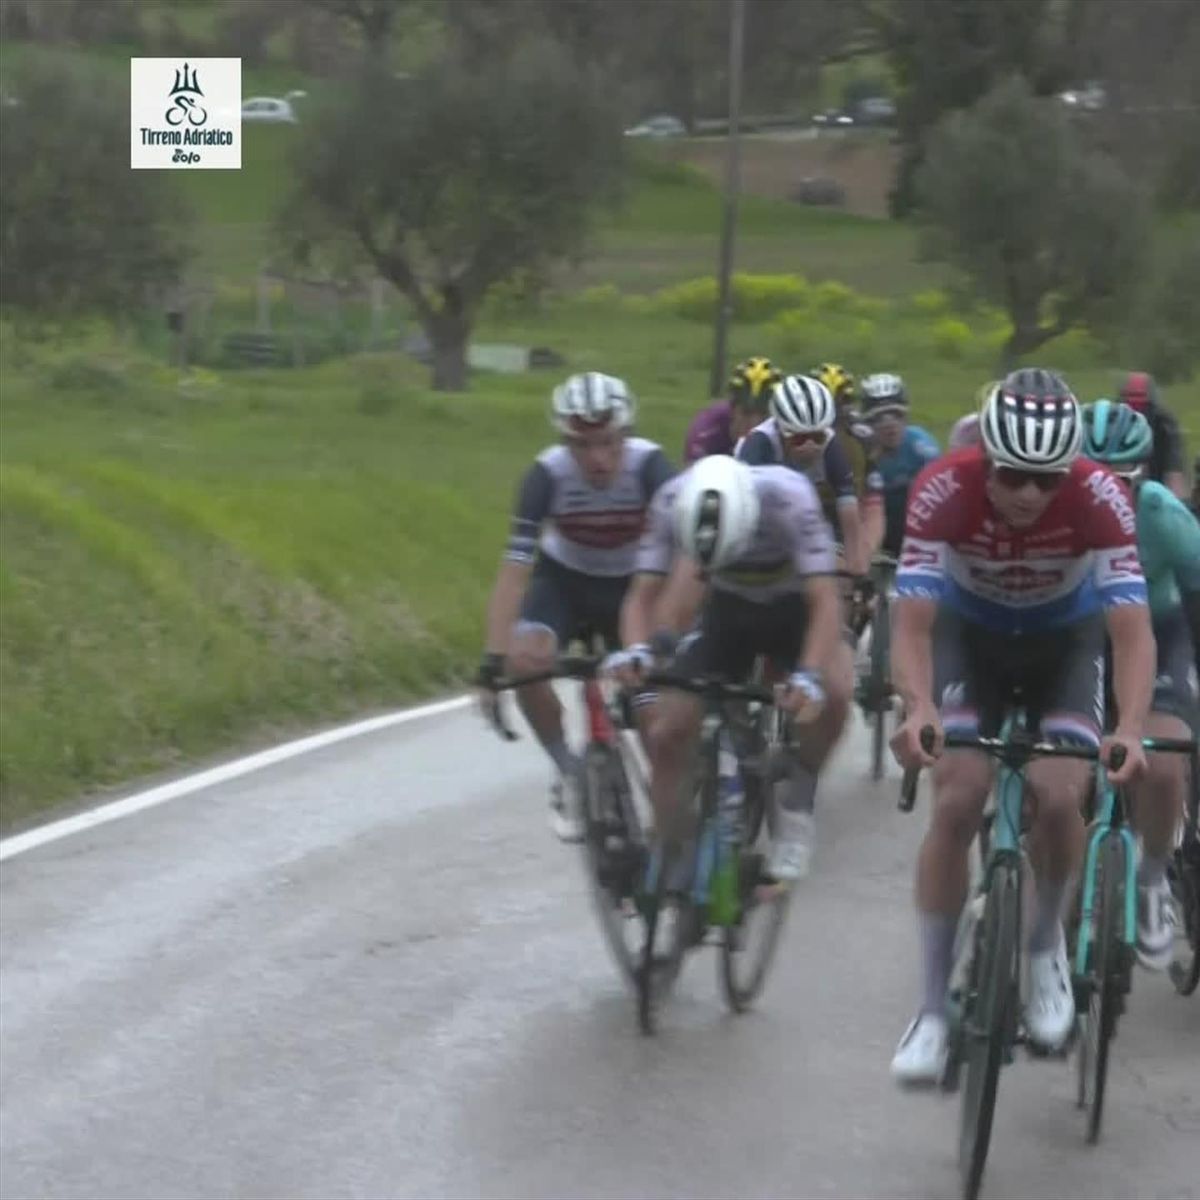 Tirreno-Adriatico 2021 Mathieu van der Poel attacks early, Julian Alaphilippe loses chain - Cycling video